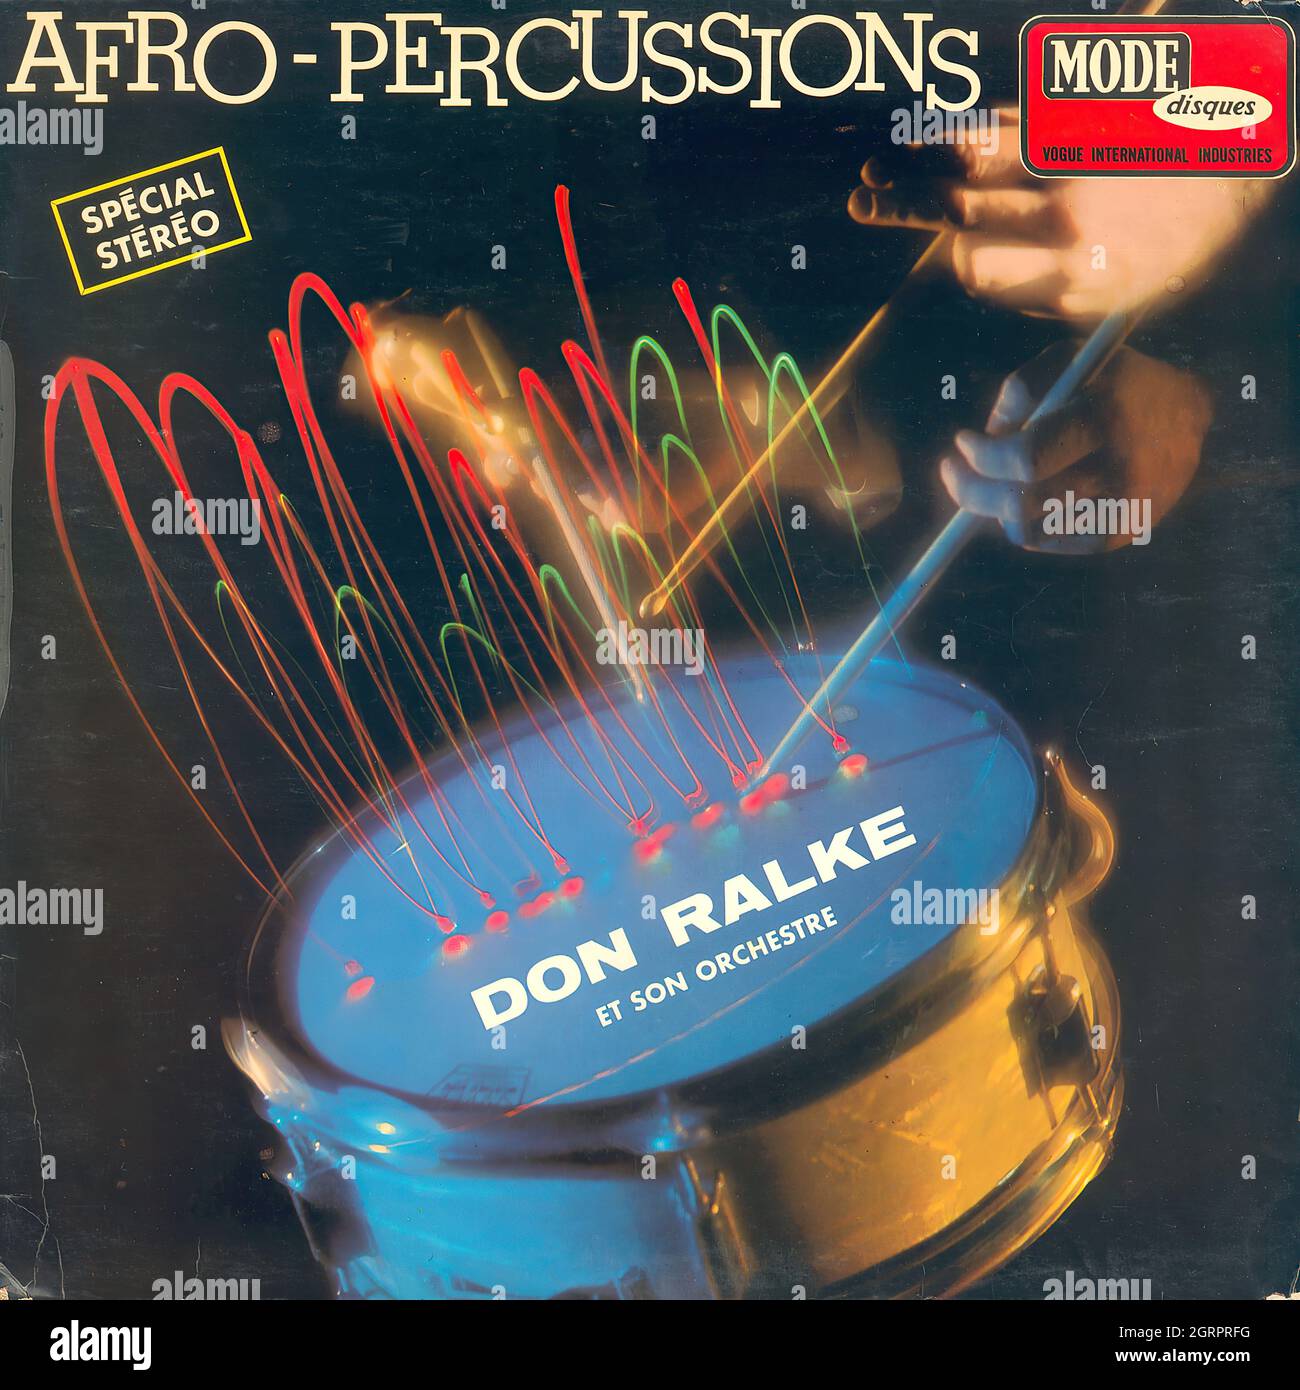 Don Ralke - Afro-percussions - Vintage Vinyl Record couverture Photo Stock  - Alamy